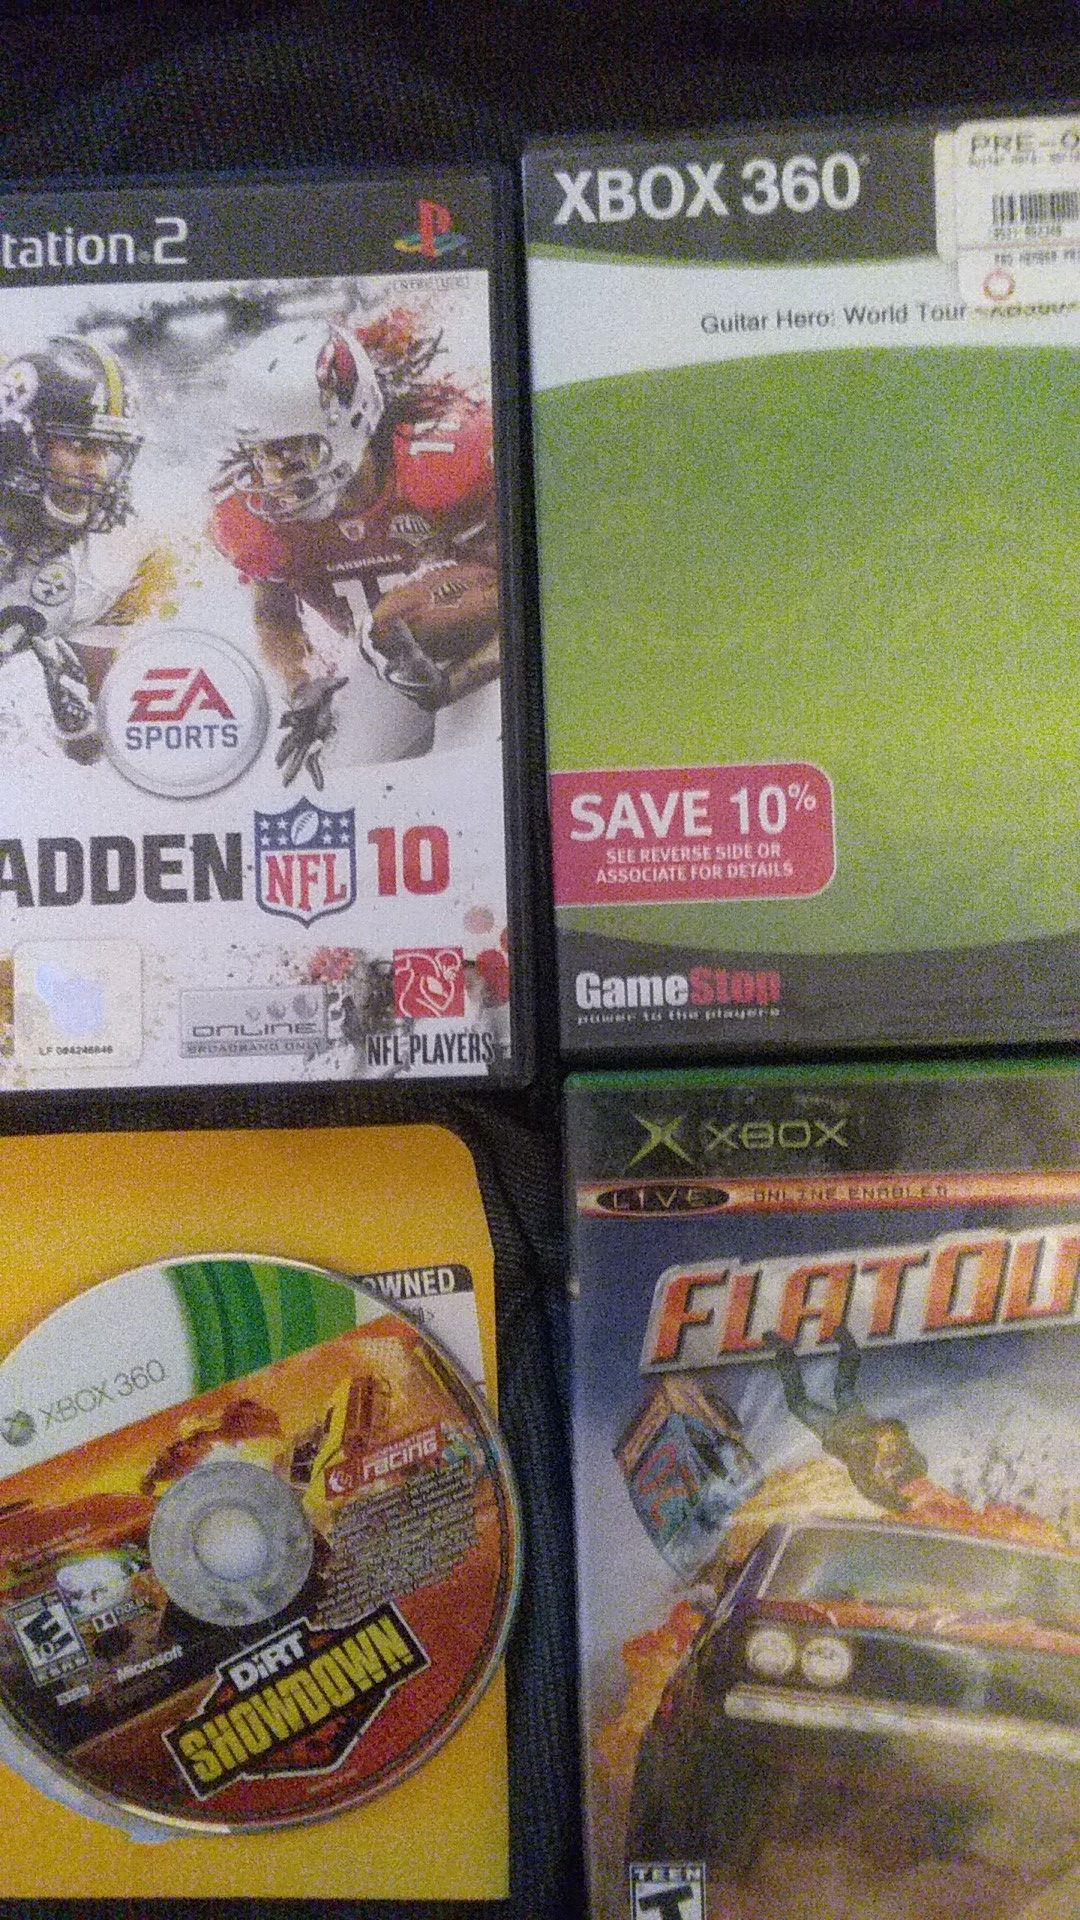 PS2, Xbox 360, and Xbox games